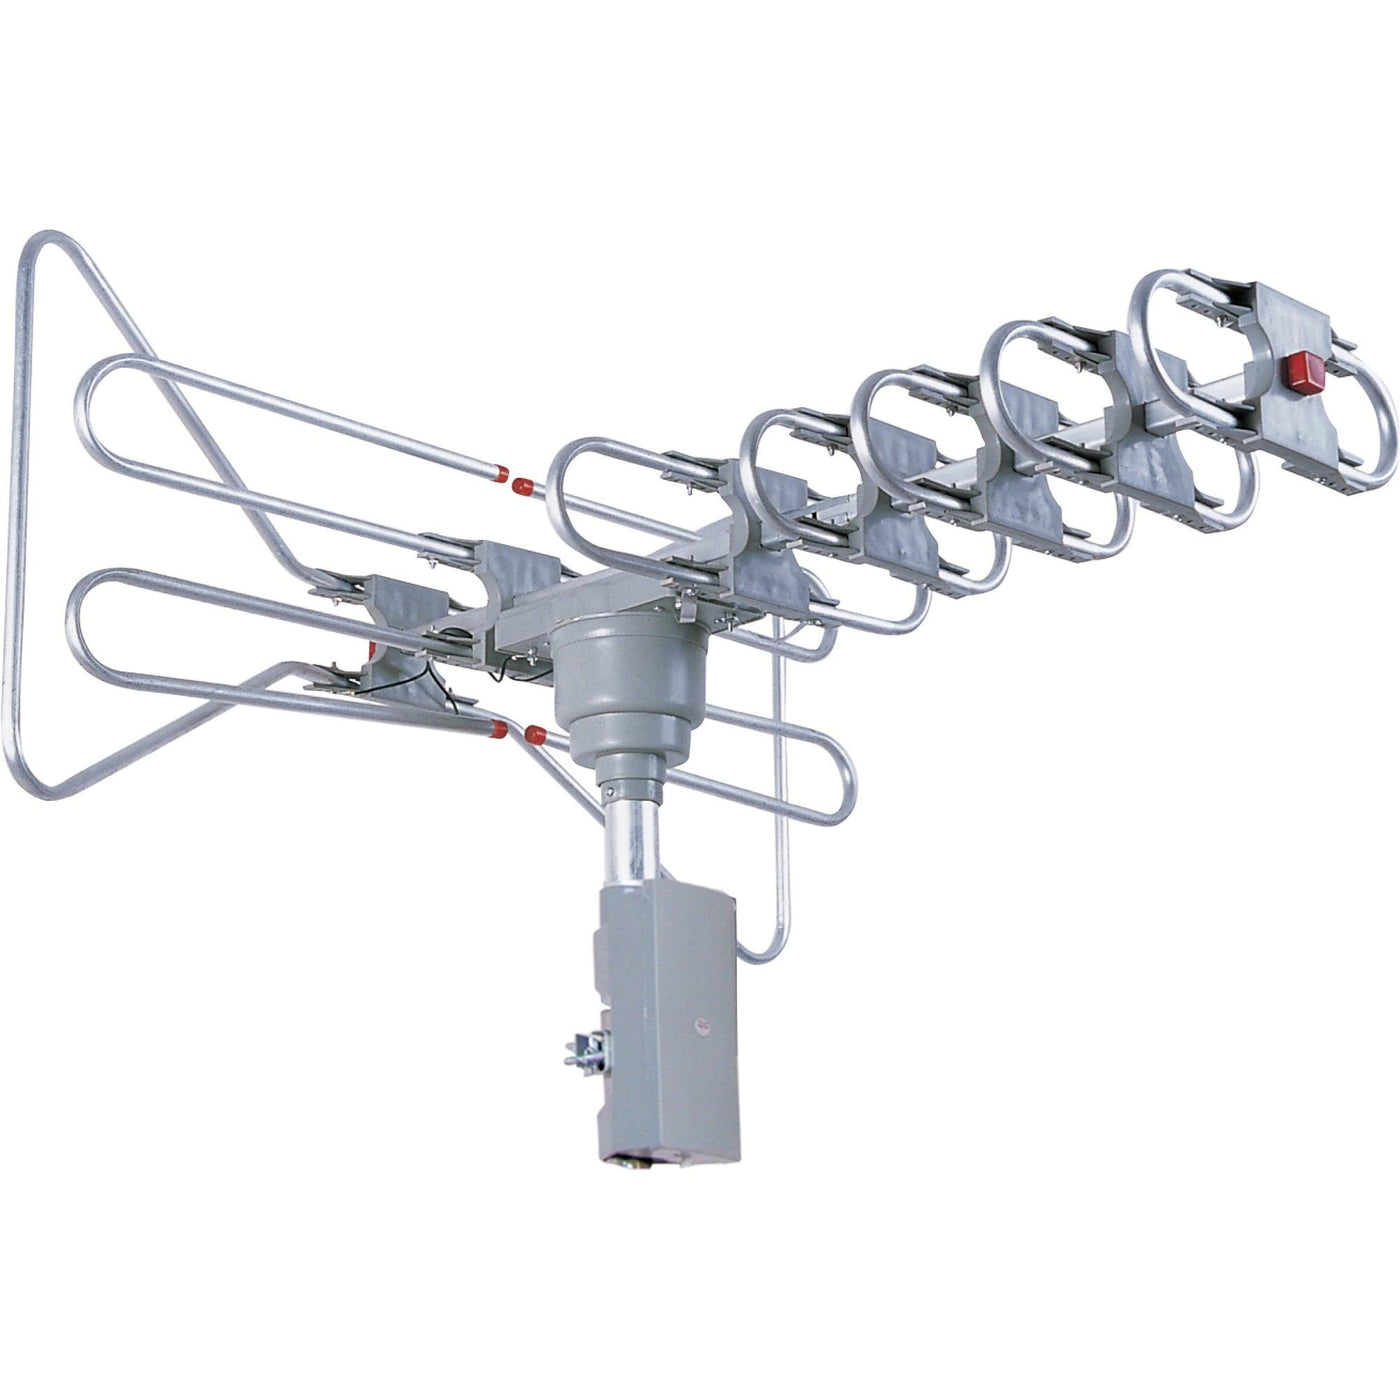 Supersonic 360-Degree HDTV Digital Amplified Motorized Antenna with Remote Control, Supports 2 TV Sets (SC-603) - VYSN